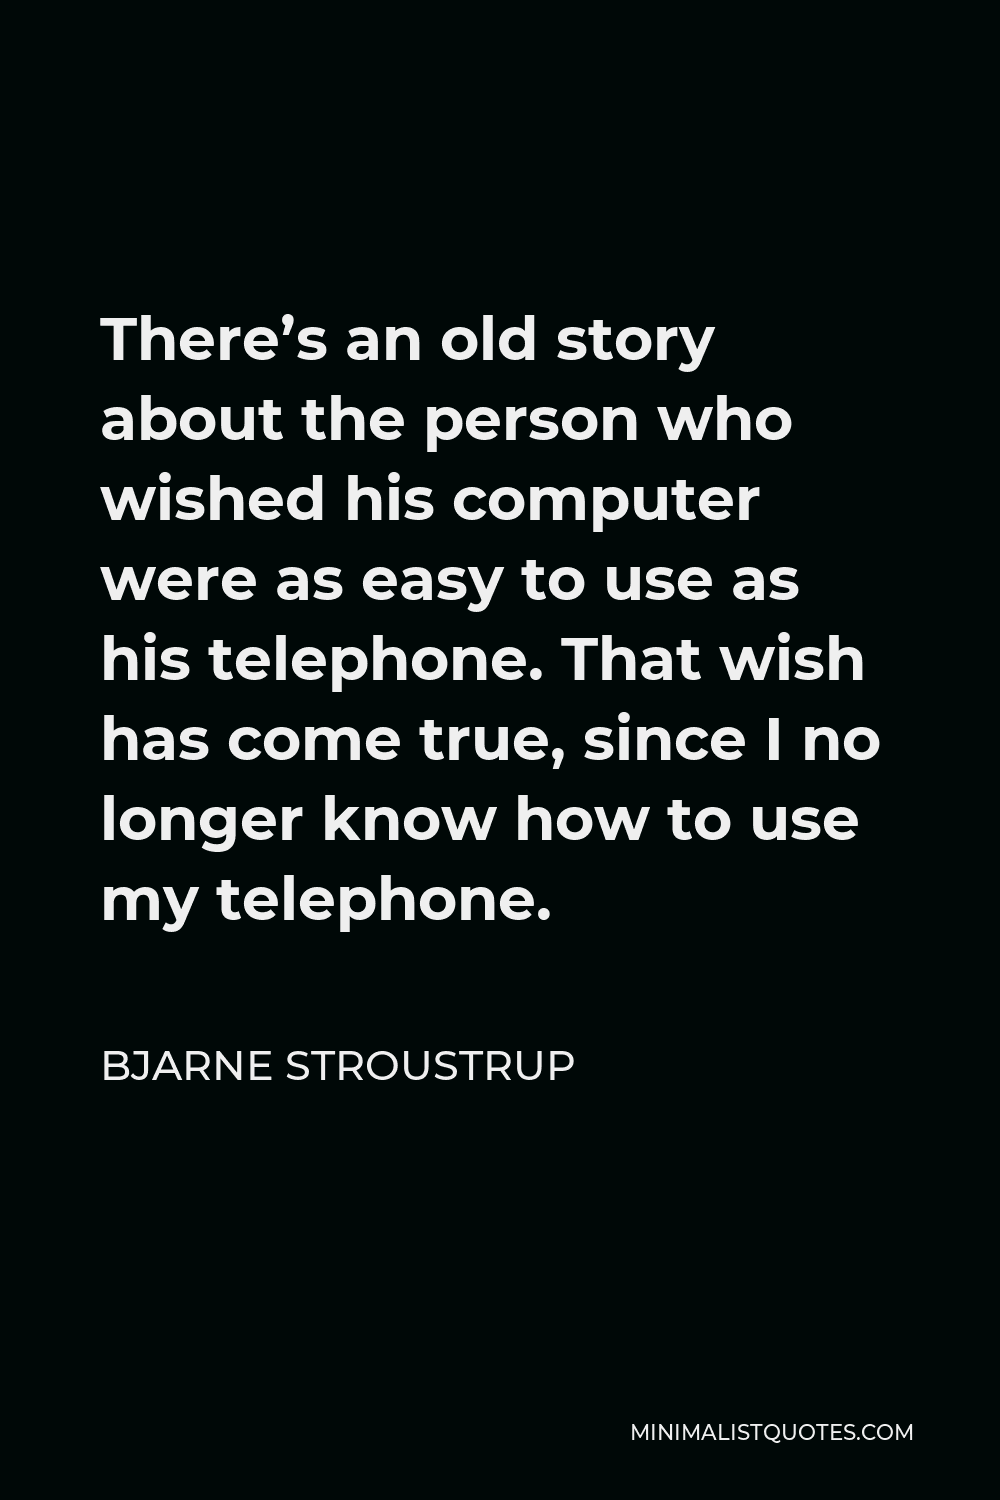 Bjarne Stroustrup Quote - There’s an old story about the person who wished his computer were as easy to use as his telephone. That wish has come true, since I no longer know how to use my telephone.